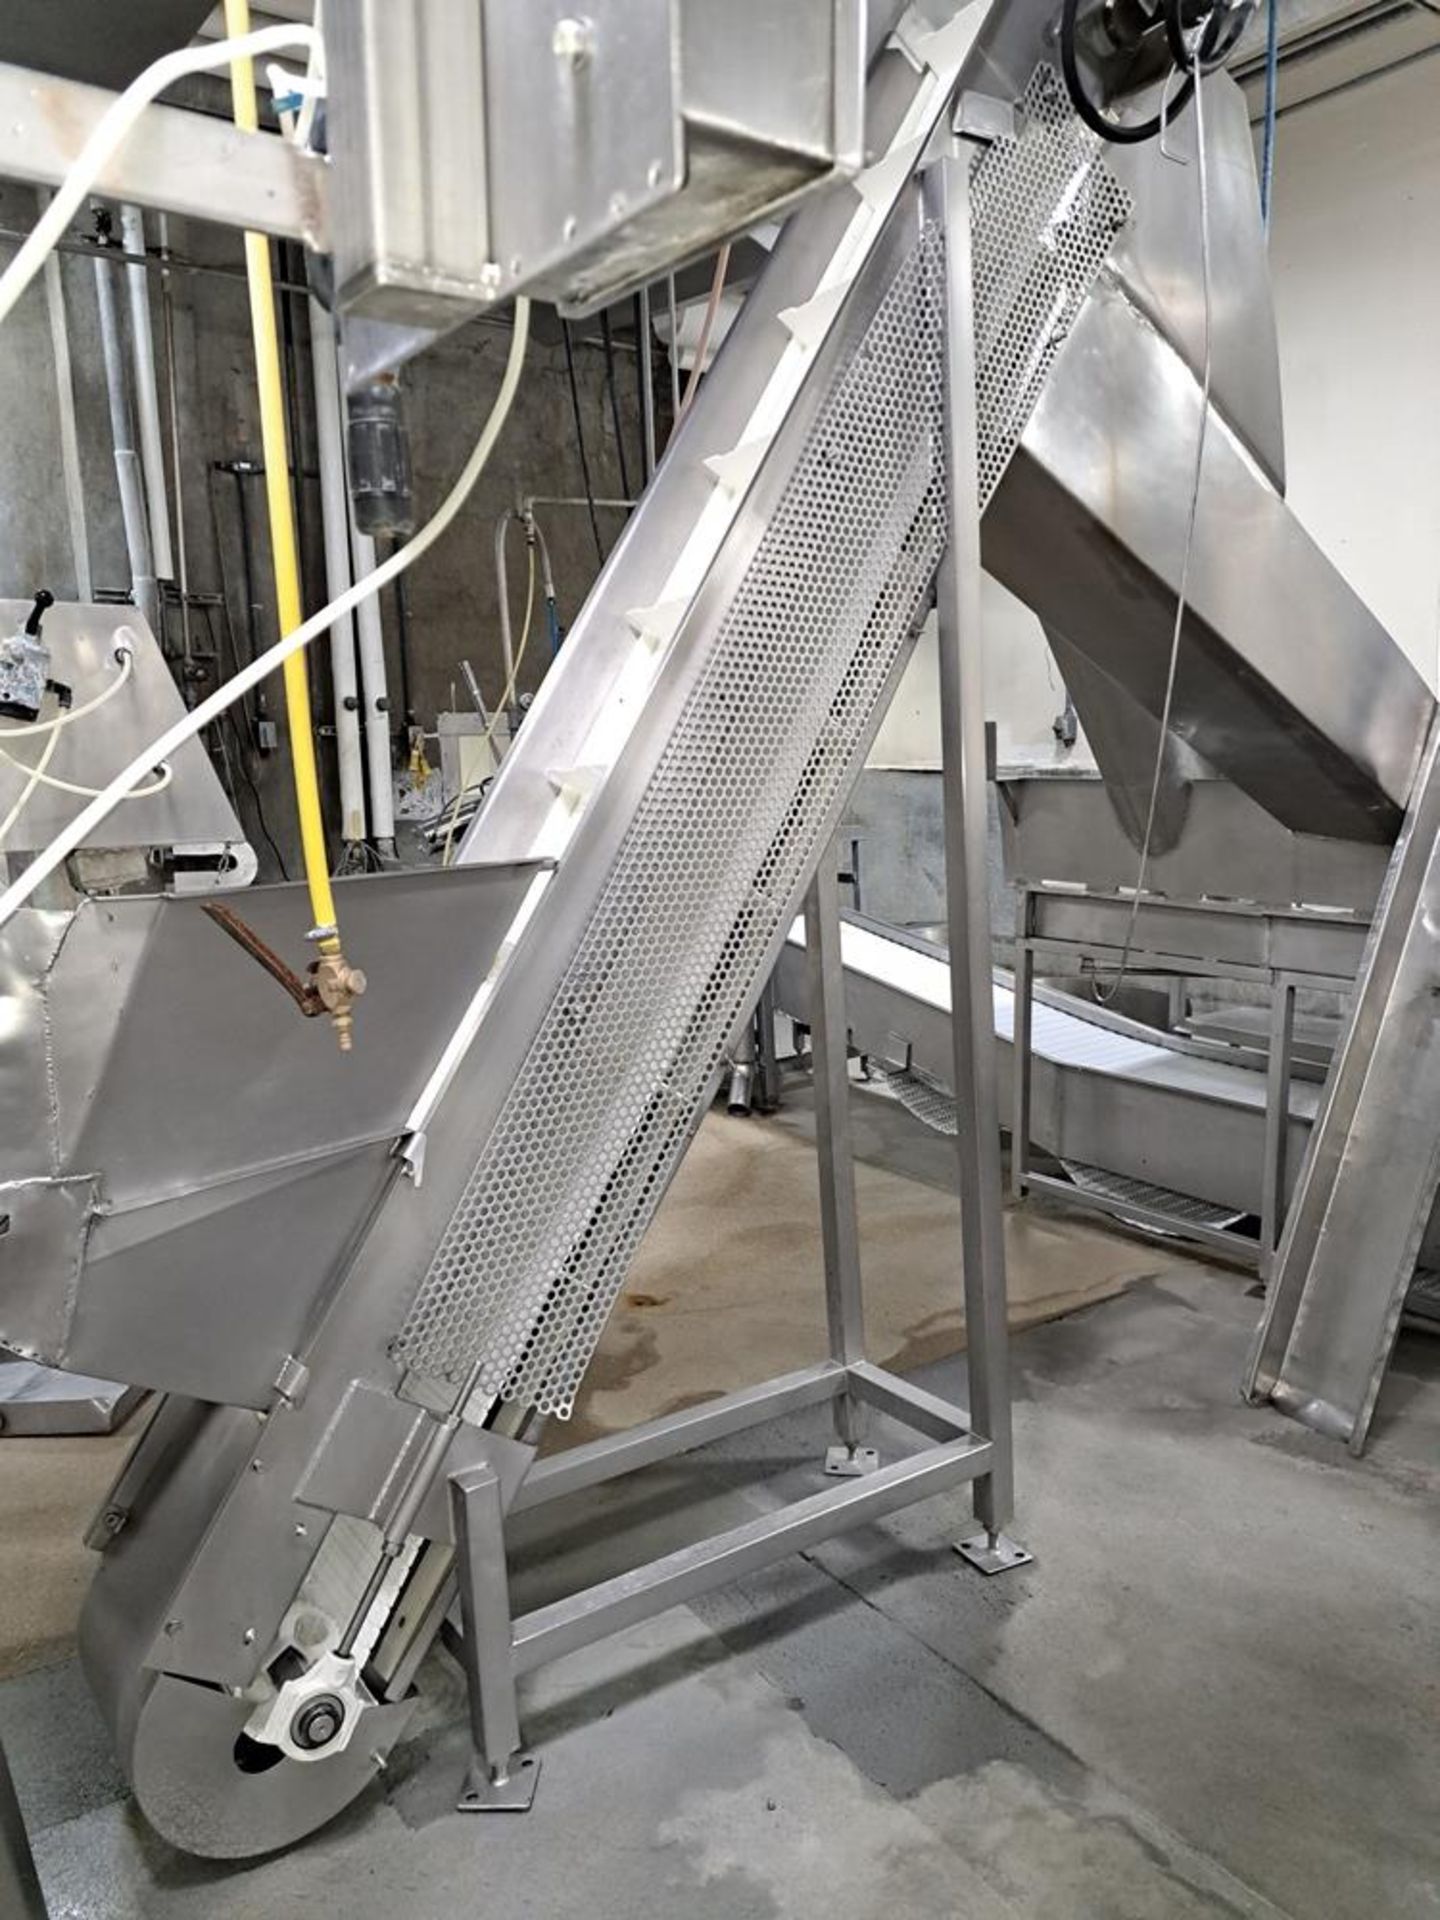 Stainless Steel Incline Conveyor, 13" W X 12' L flighted plastic belt, 24" infeed, 9' discharge: - Image 2 of 2